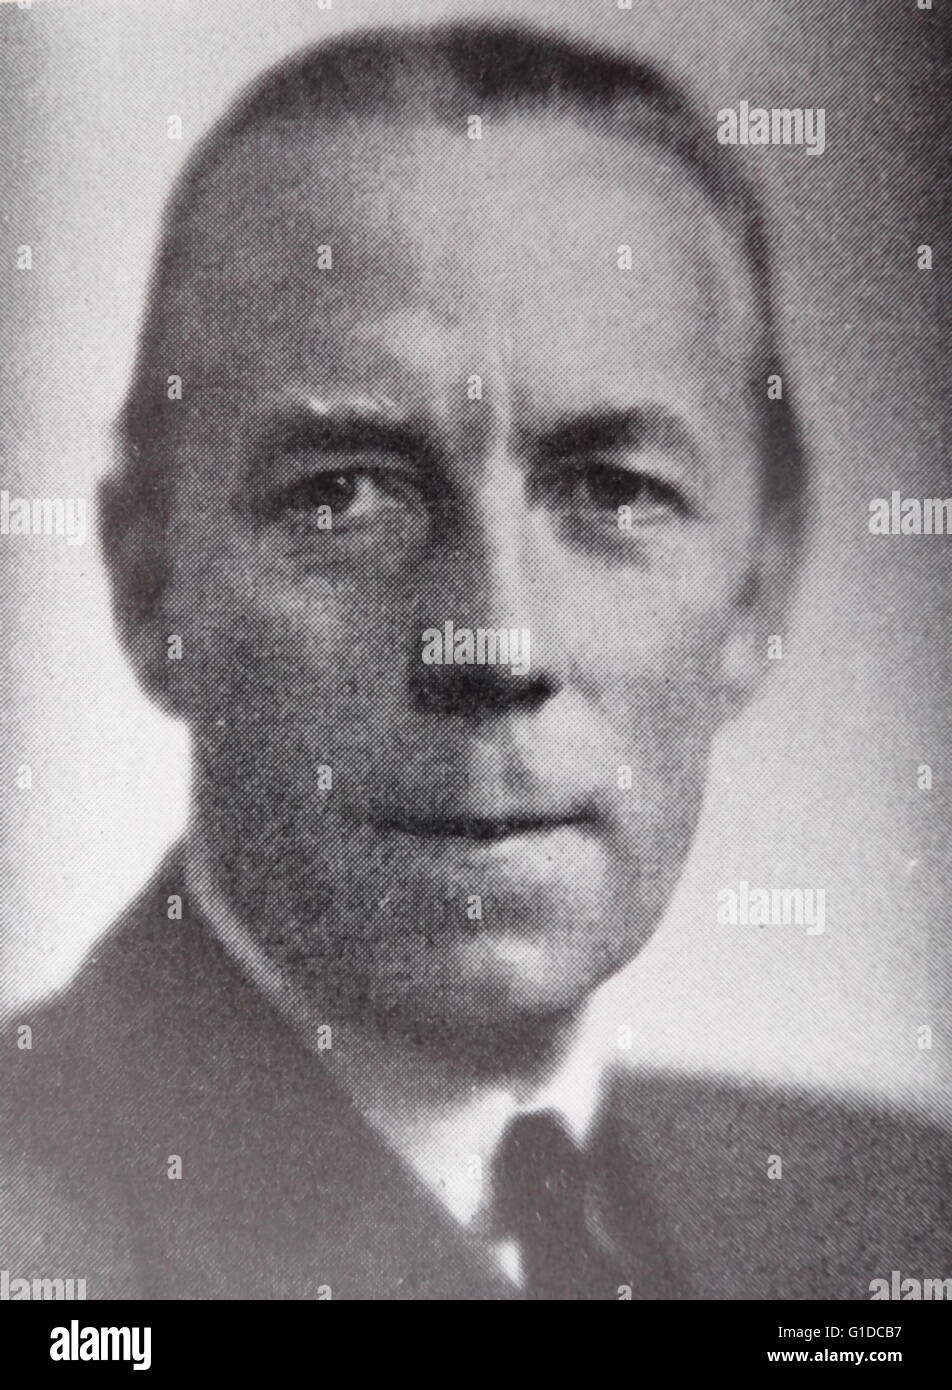 Photographic portrait of Folke Bernadotte, Count of Wisborg (1895-1948) a Swedish diplomat, negotiator and nobleman. He managed to negotiate the release of over 30,000 prisoners from German concentration camps during the Second World War. Dated 20th Century Stock Photo